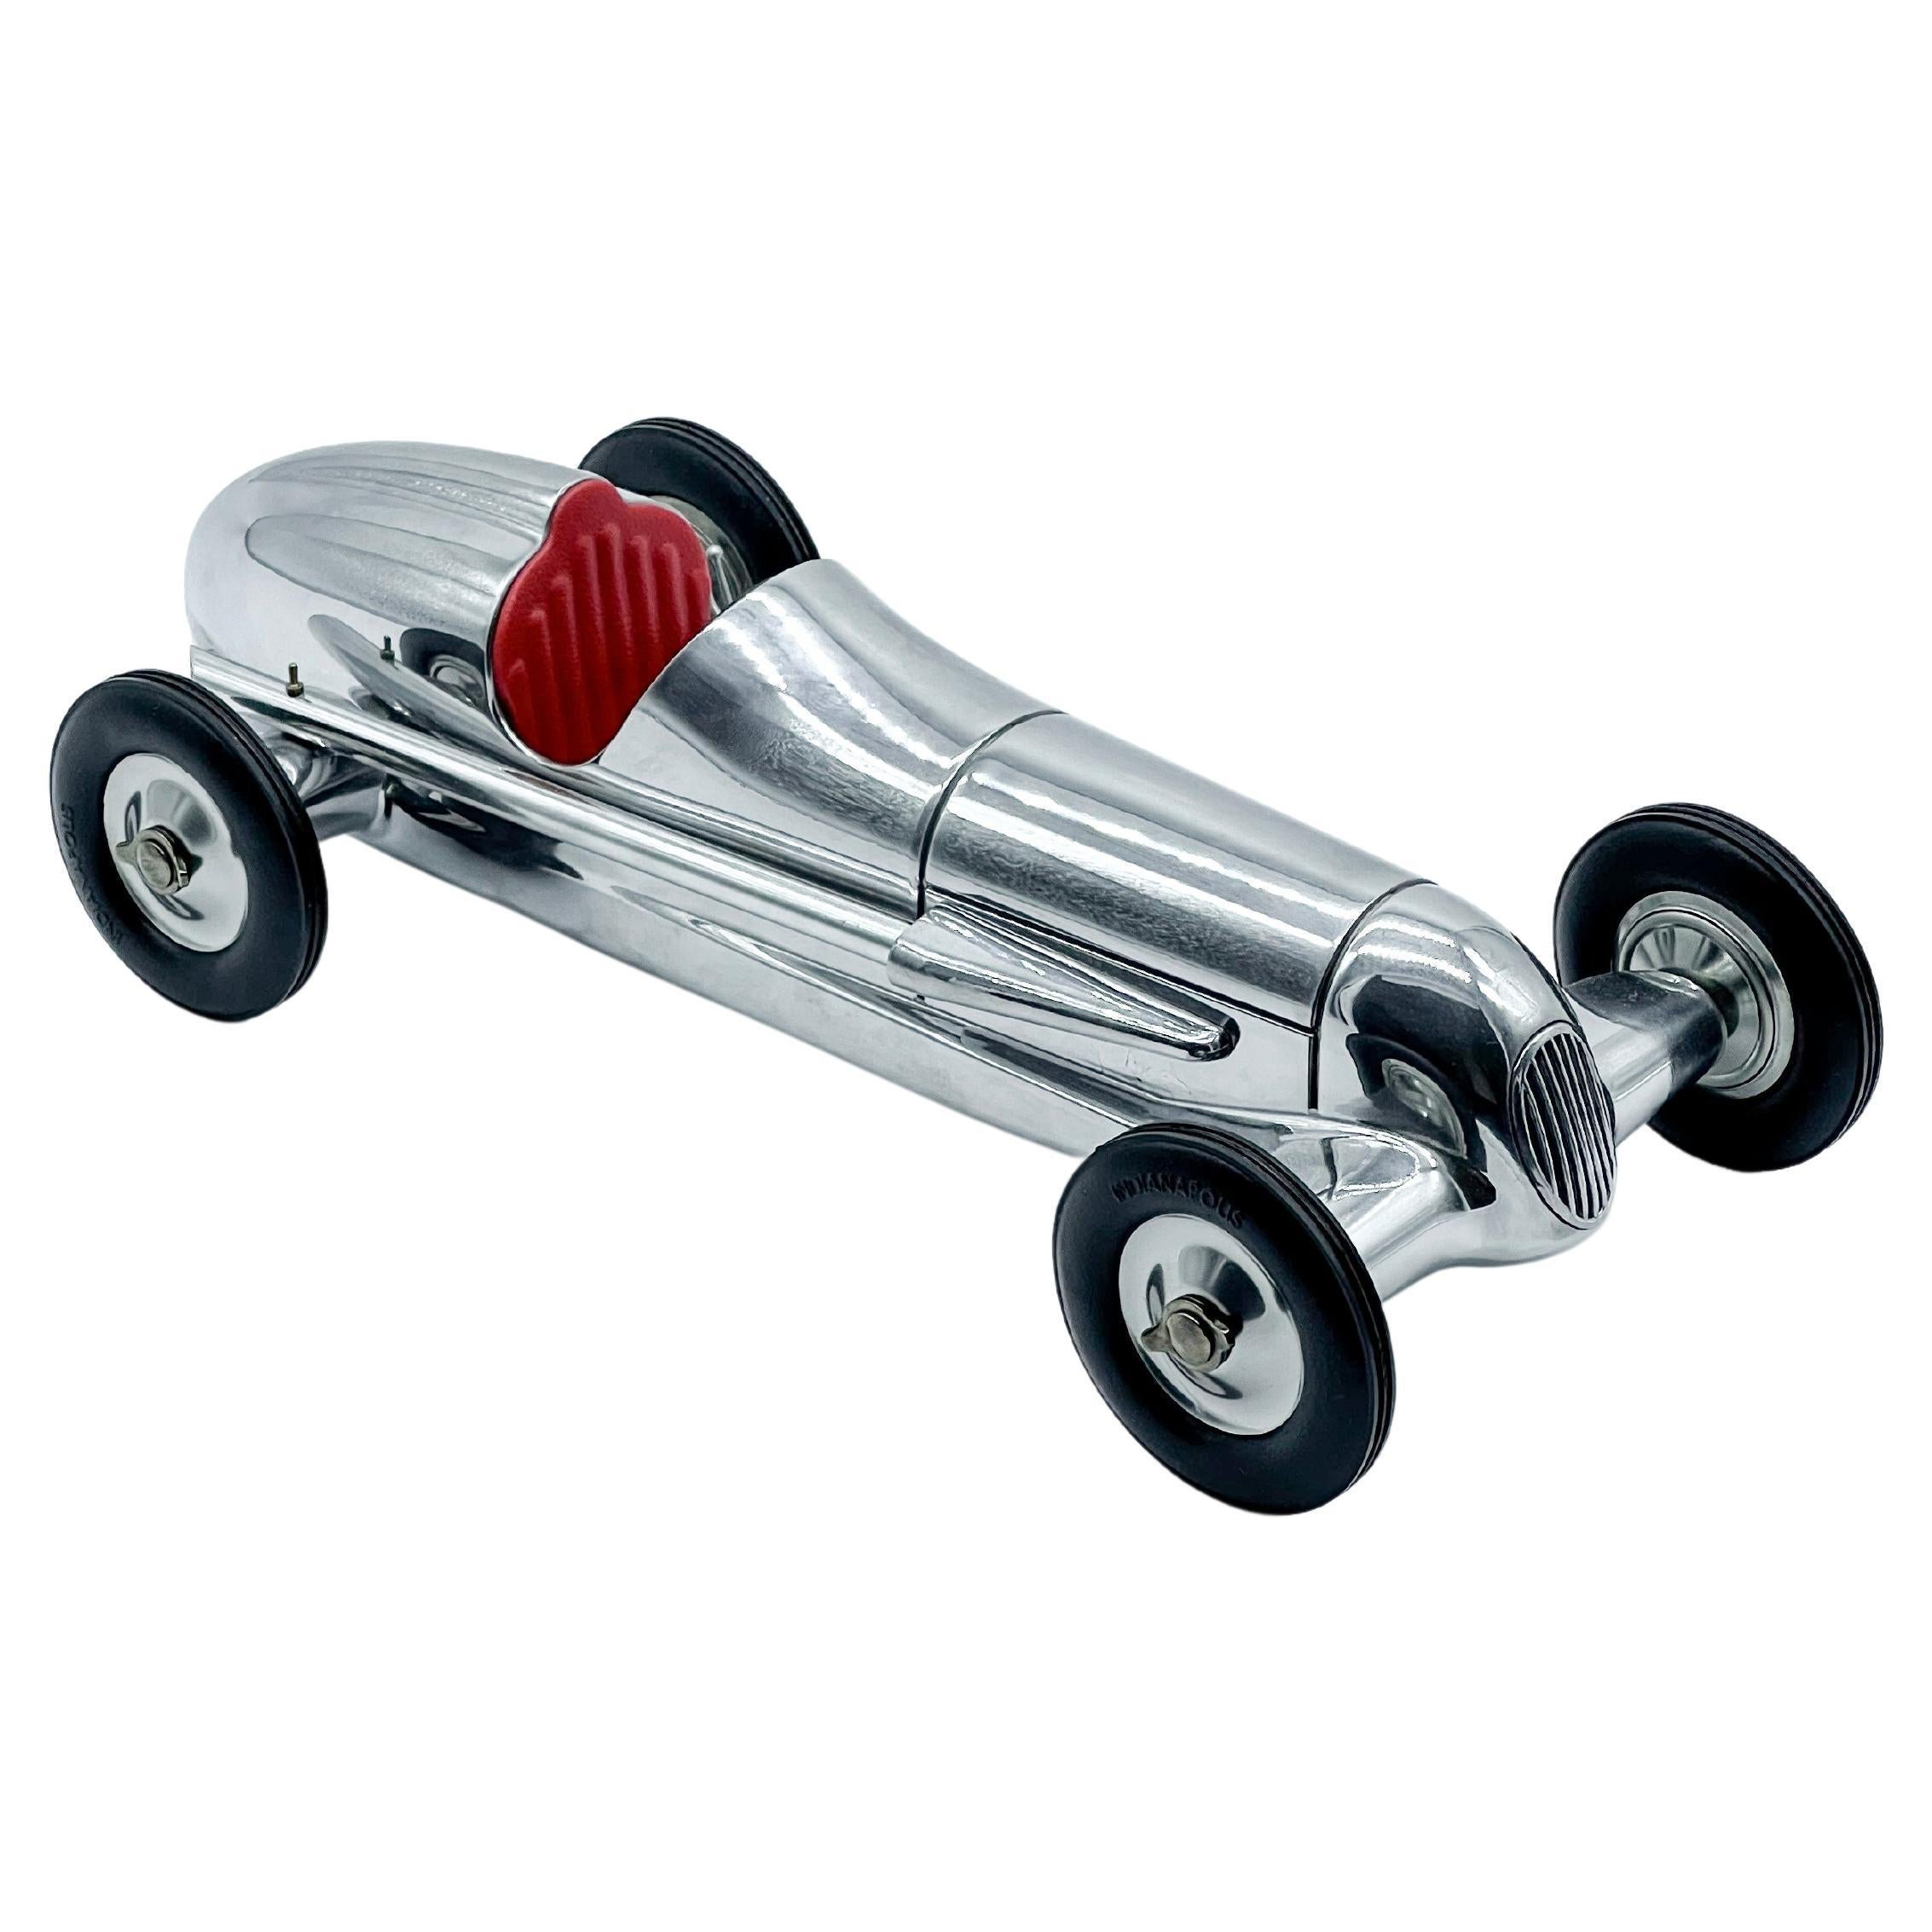 1930s Racing Car Black and Red Scale Model, Highly Detailed, Medium Size For Sale